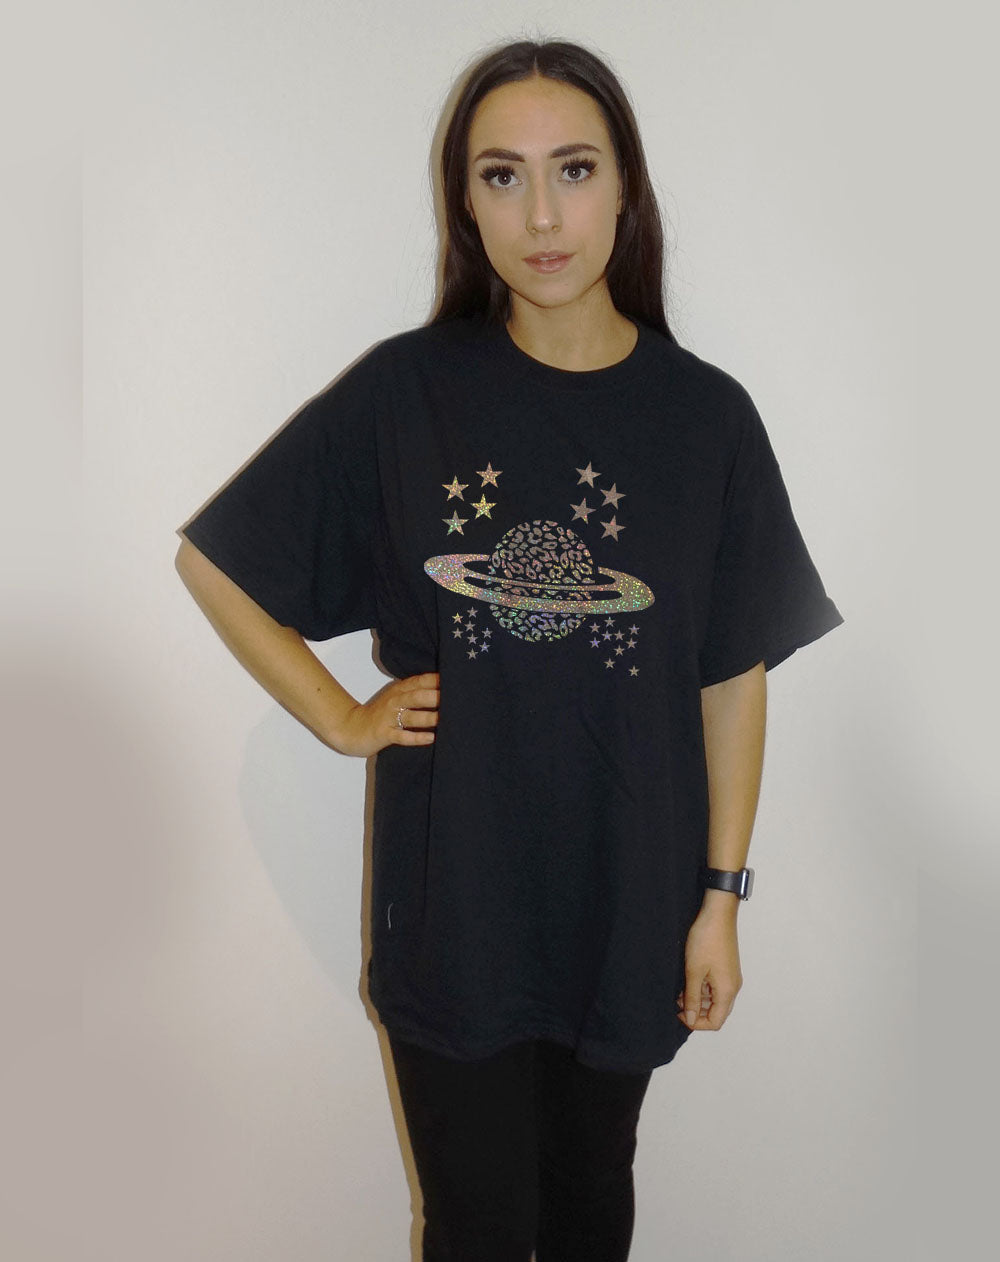 Black Tee With Silver Celestial Glitter Print